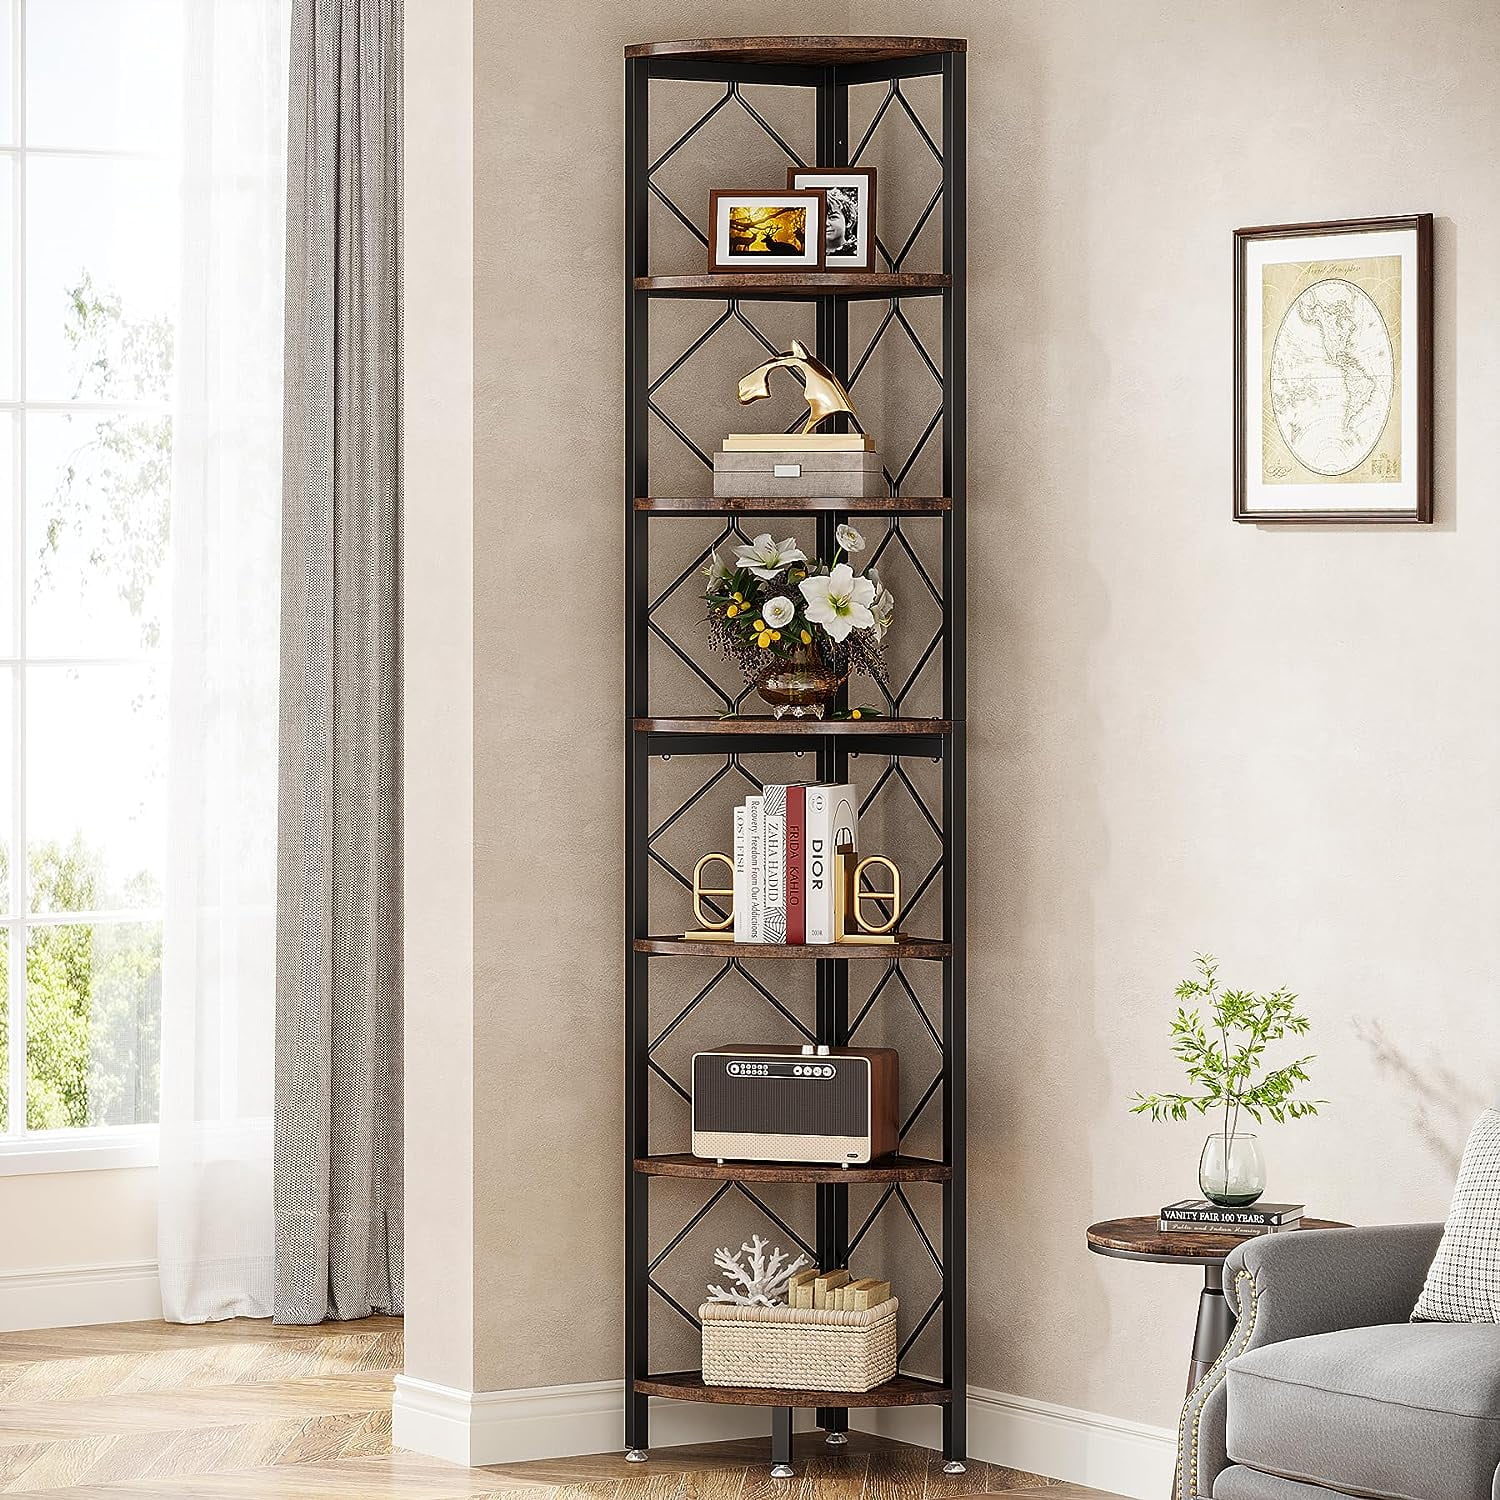 Tribesigns 6-Tier Corner Shelf, 75 Inch Tall Narrow Bookshelf Storage Rack,  Etagere Shelves Display Stand for Small Spaces, Rustic Open Bookcase